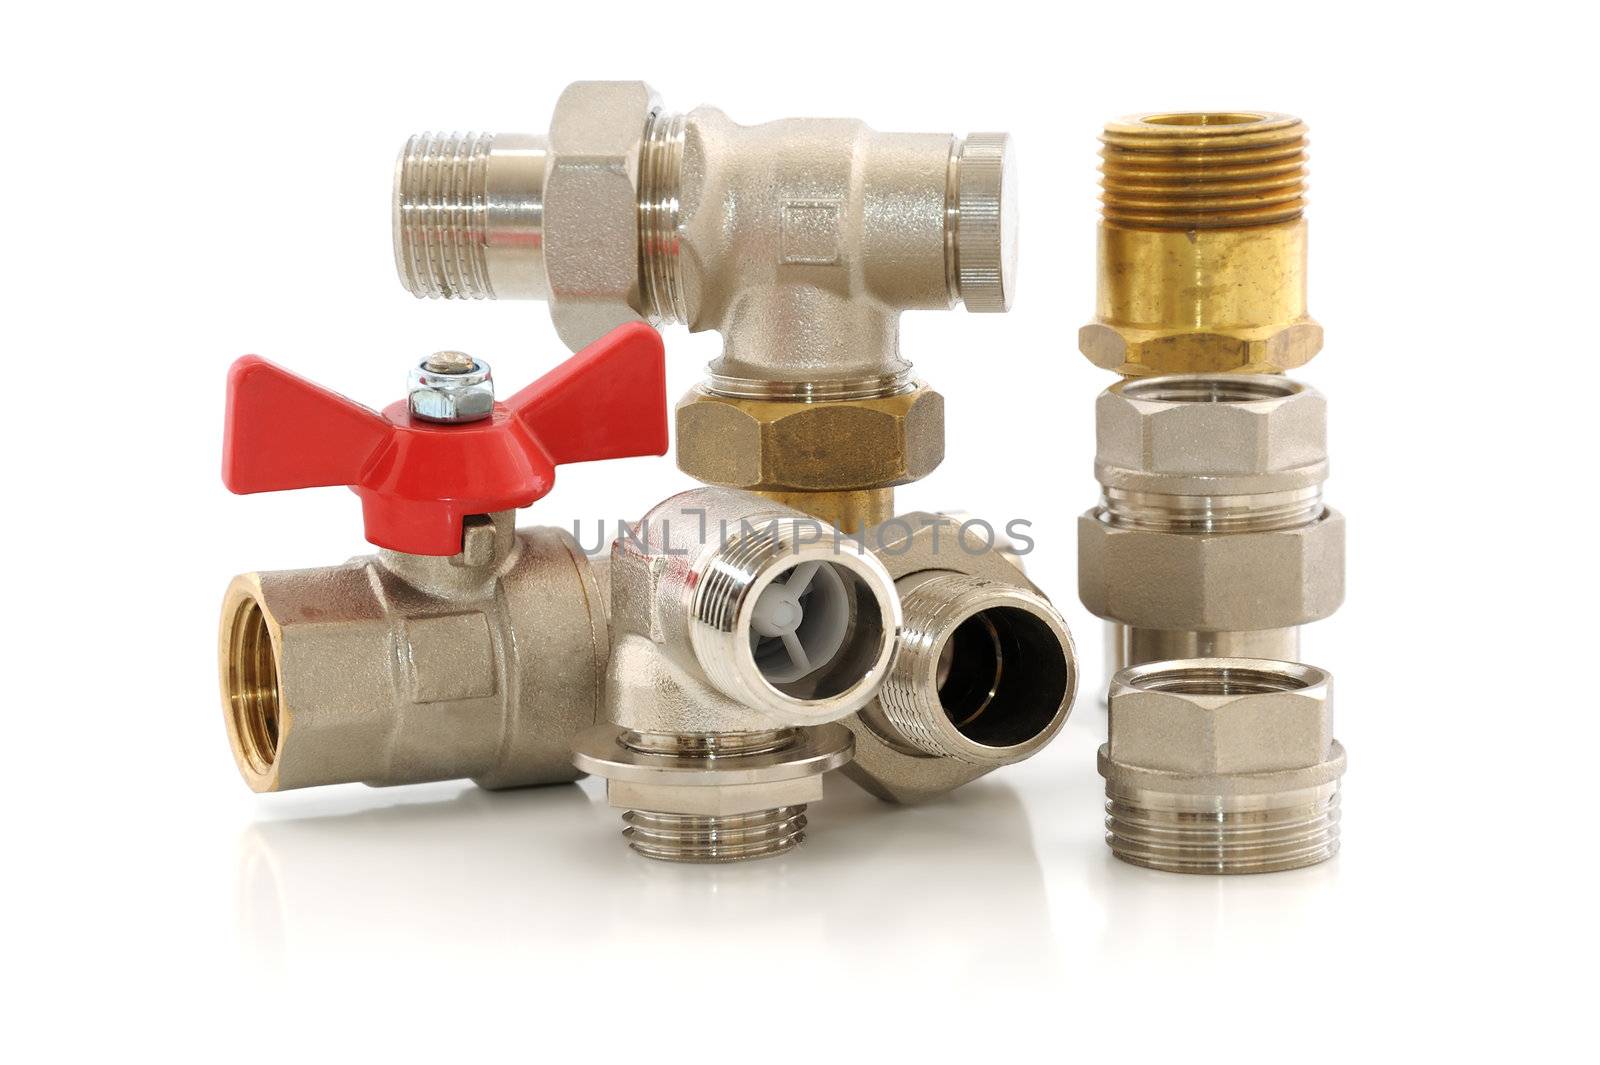 Various metal parts for plumbing and sanitary ware